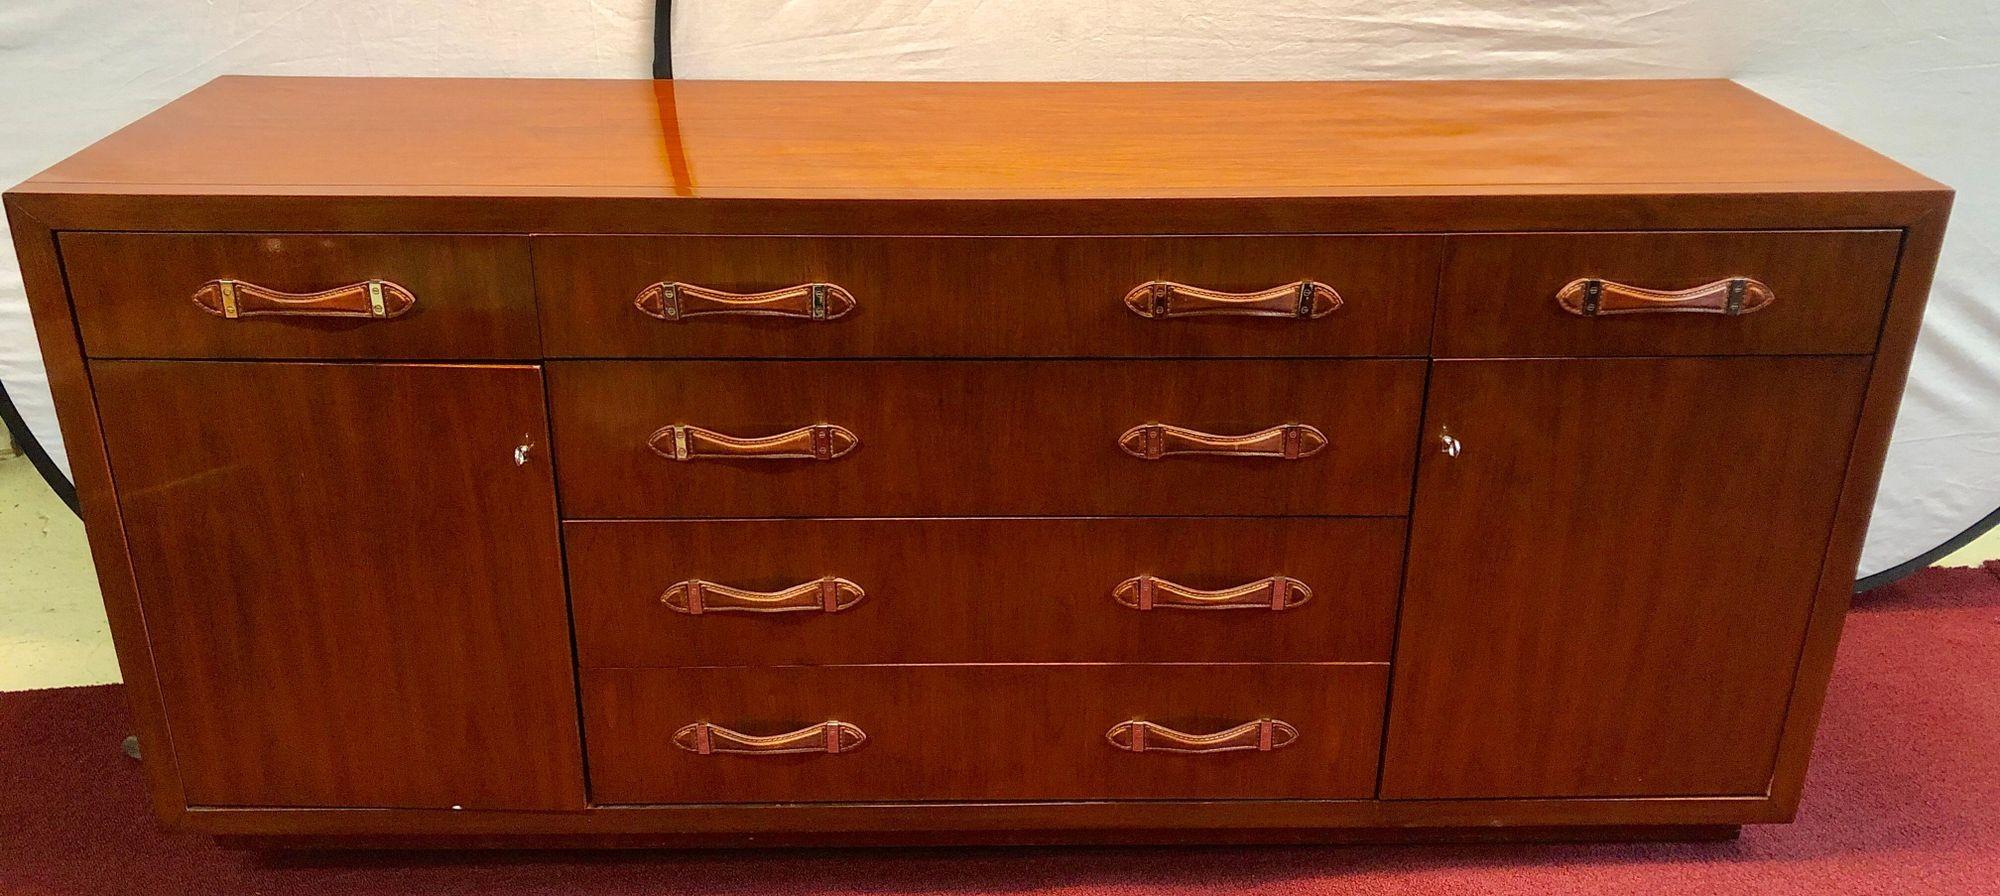 Modern Hollywood Double Chest mahogany with leather pulls labeled Ralph Lauren

Ralph Lauren double chest in mahogany with leather pulls retails $12,495 Home walnut finished dresser with saddle leather pulls. Homage to 1940s luggage design with a